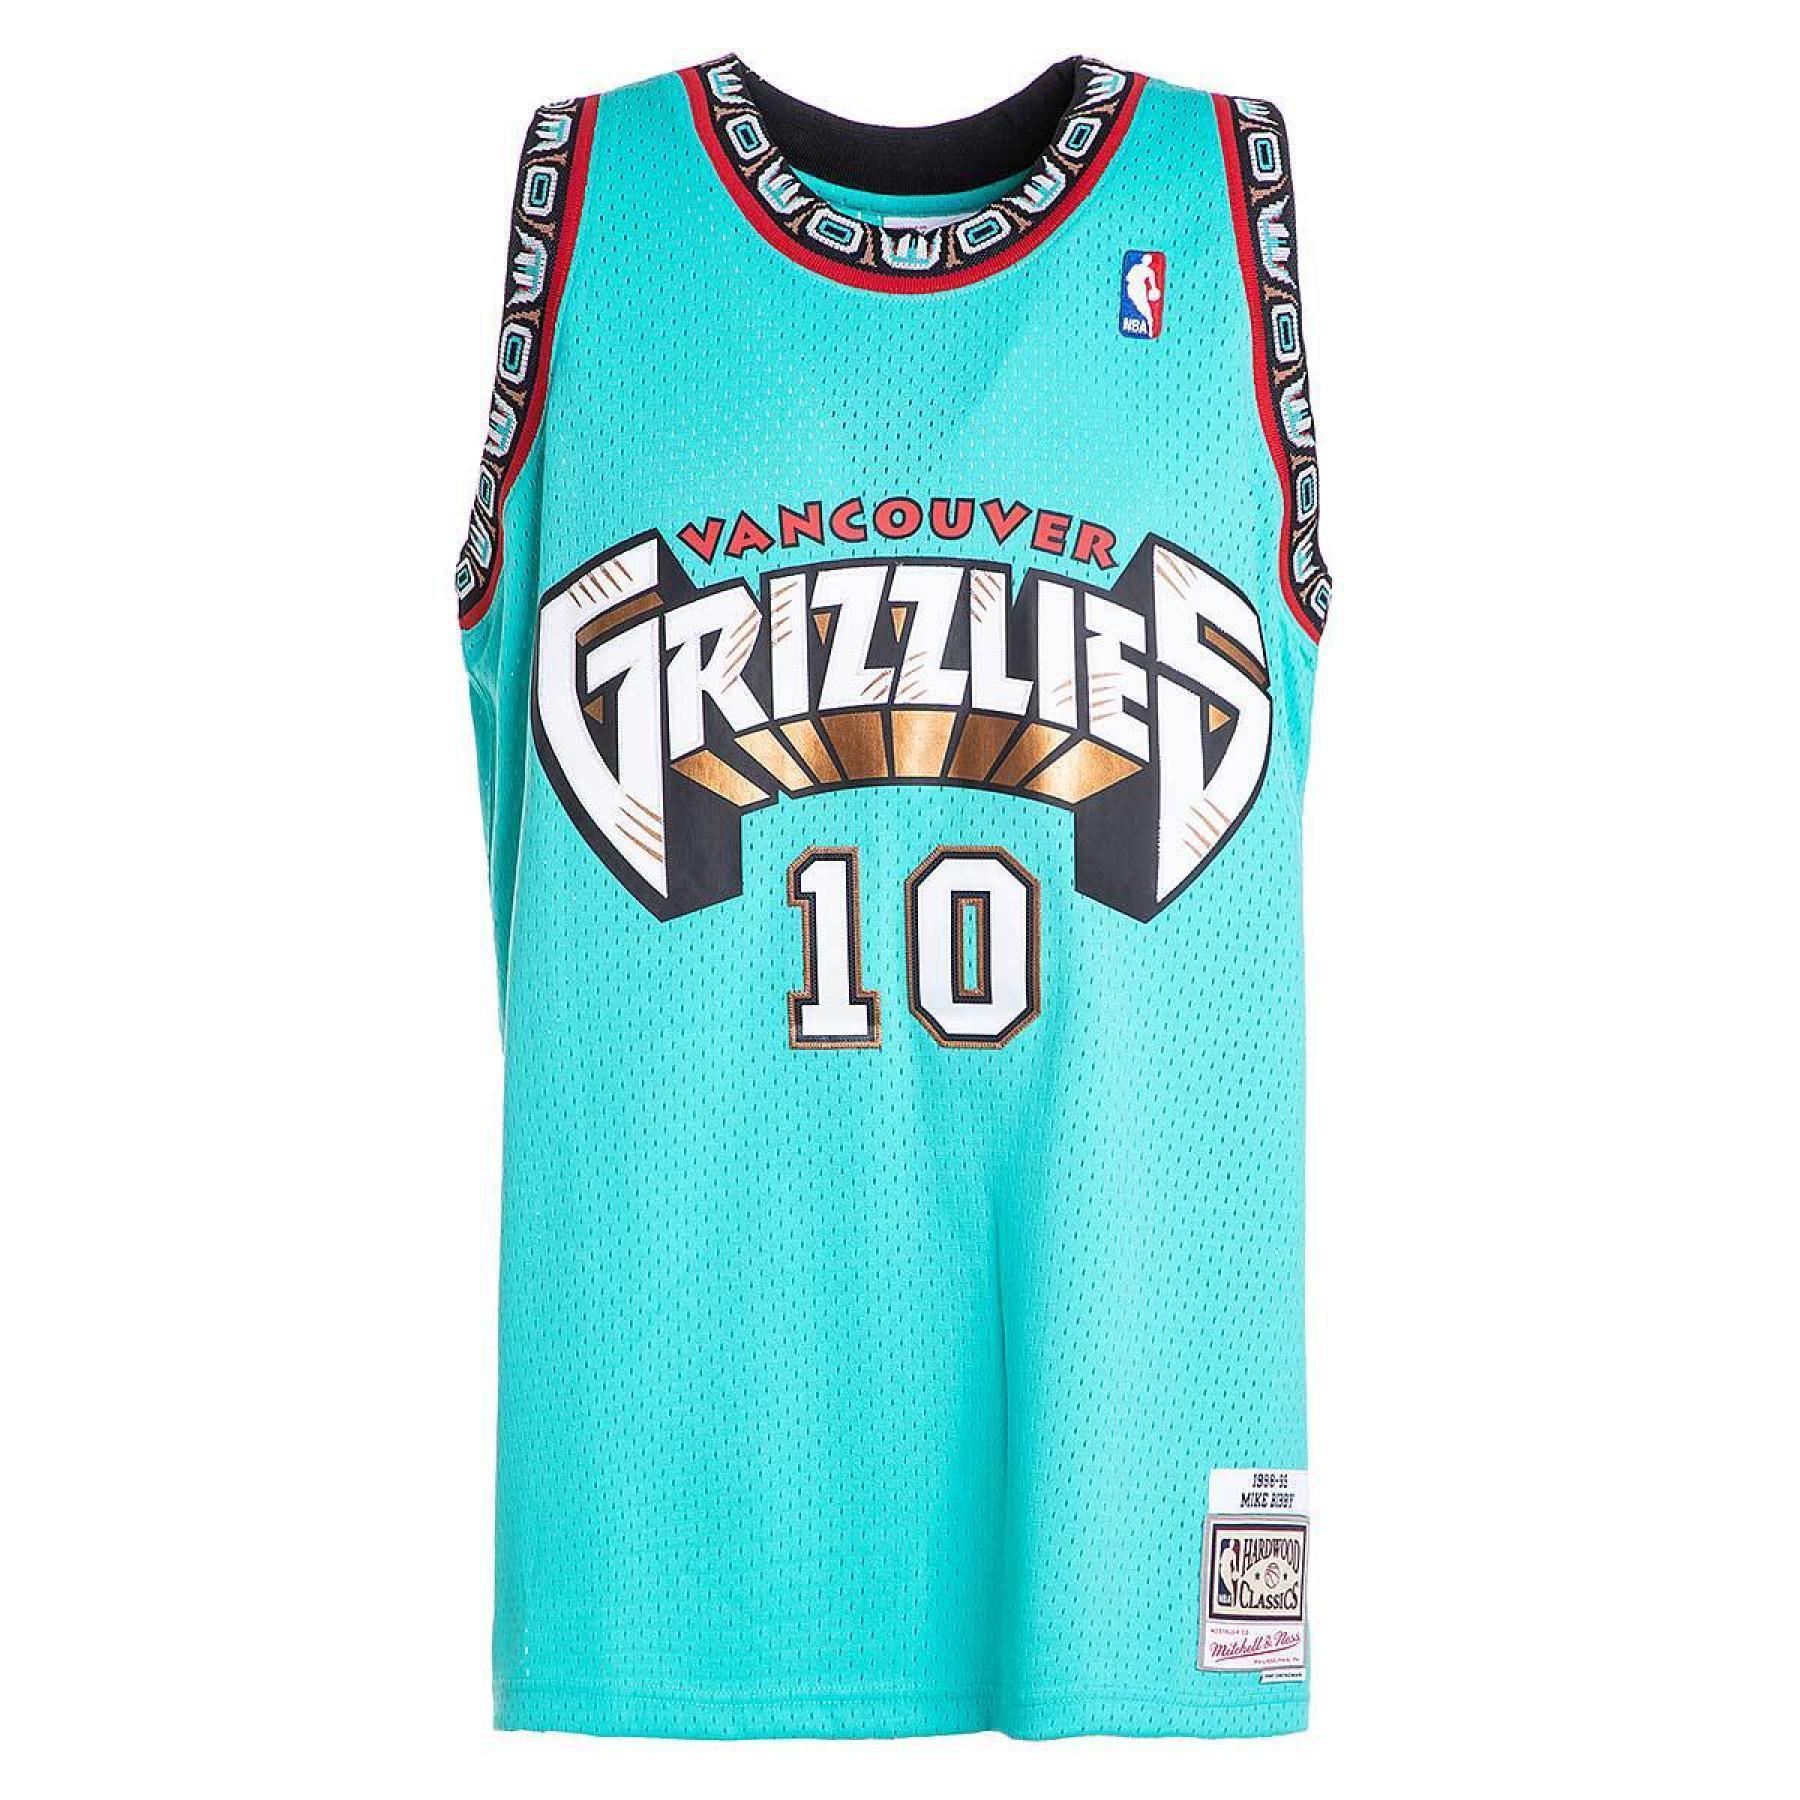 Camisola Mitchell & Ness Nba Vancouver Grizzlies